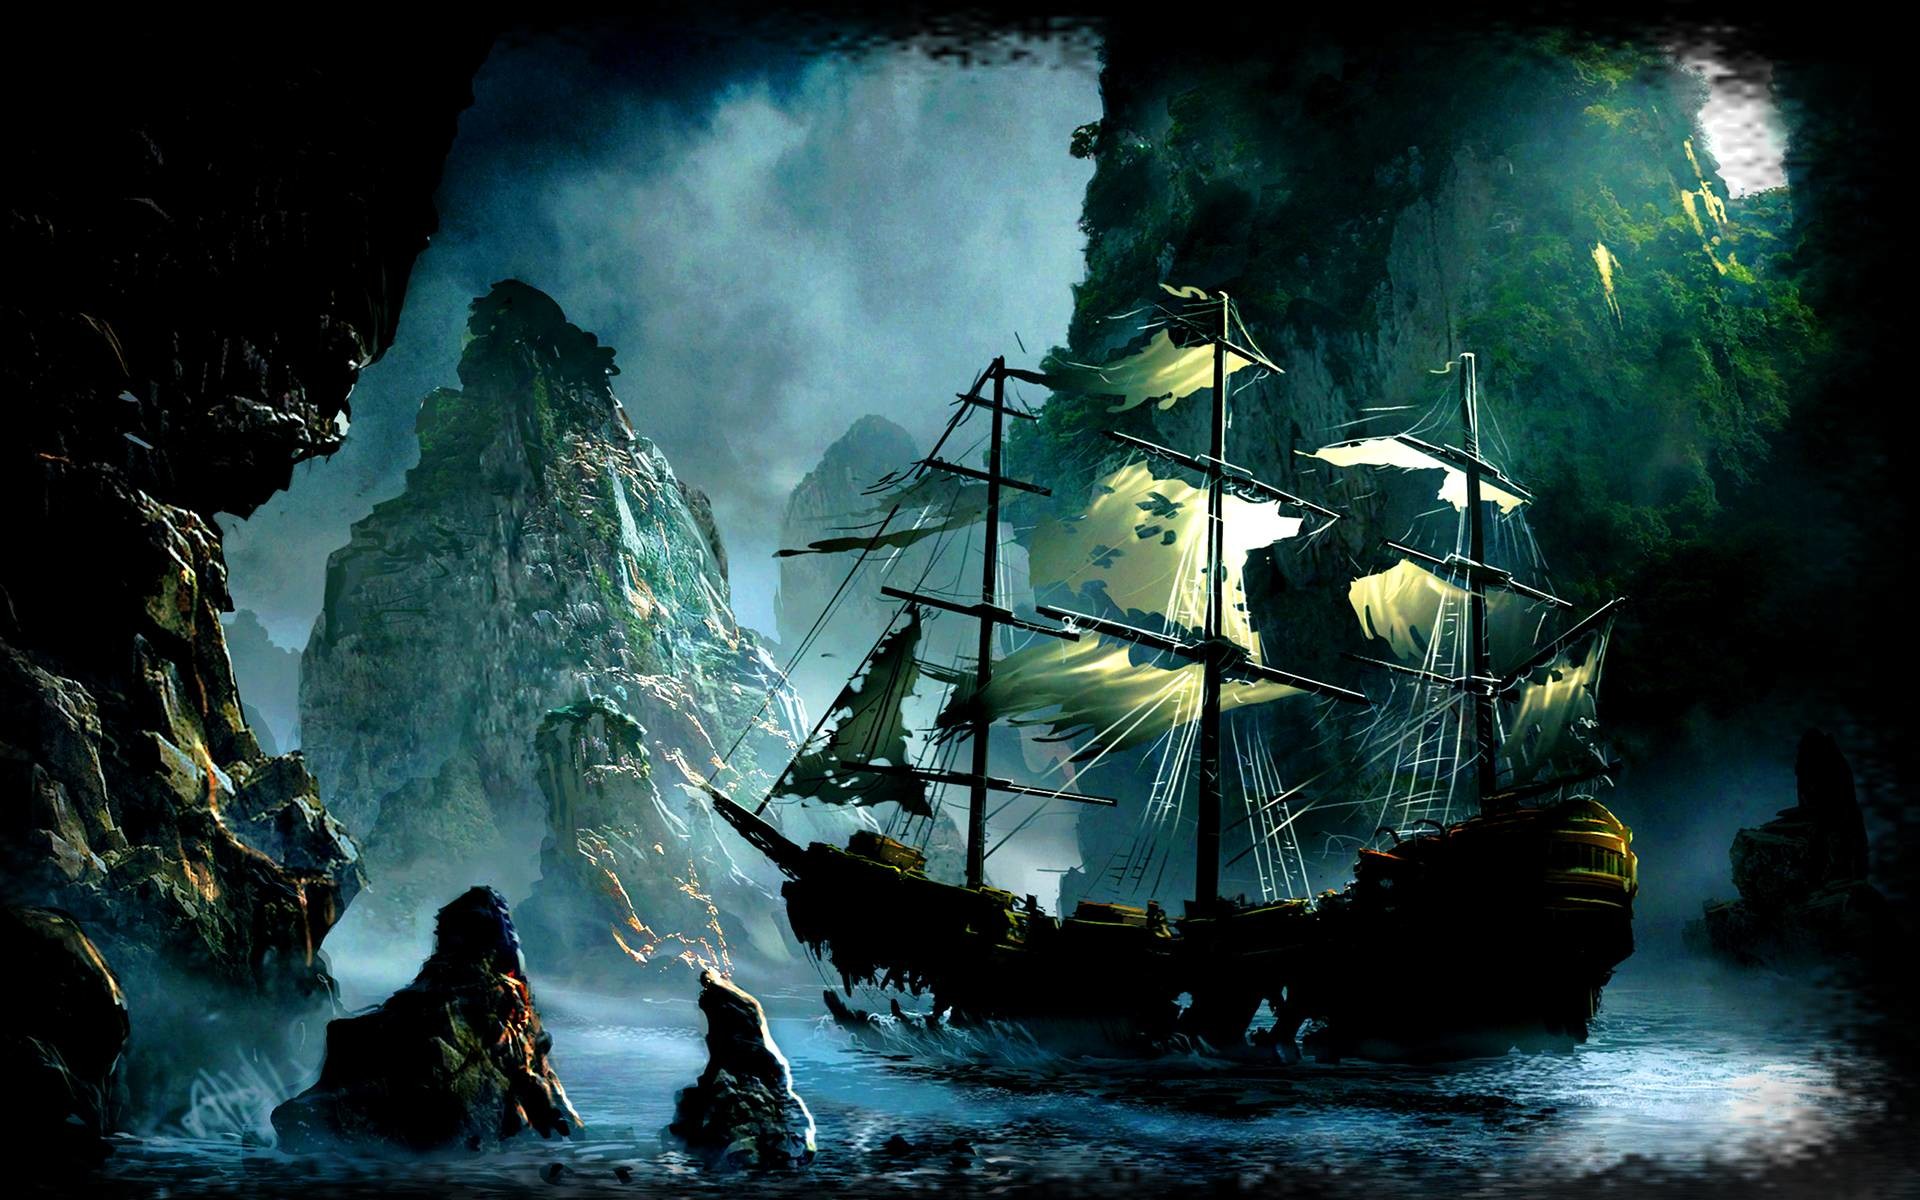 1920x1200, Ghost Pirate Ship Backgrounds Data Id - Pirate Ship In A Cave -  1920x1200 Wallpaper 